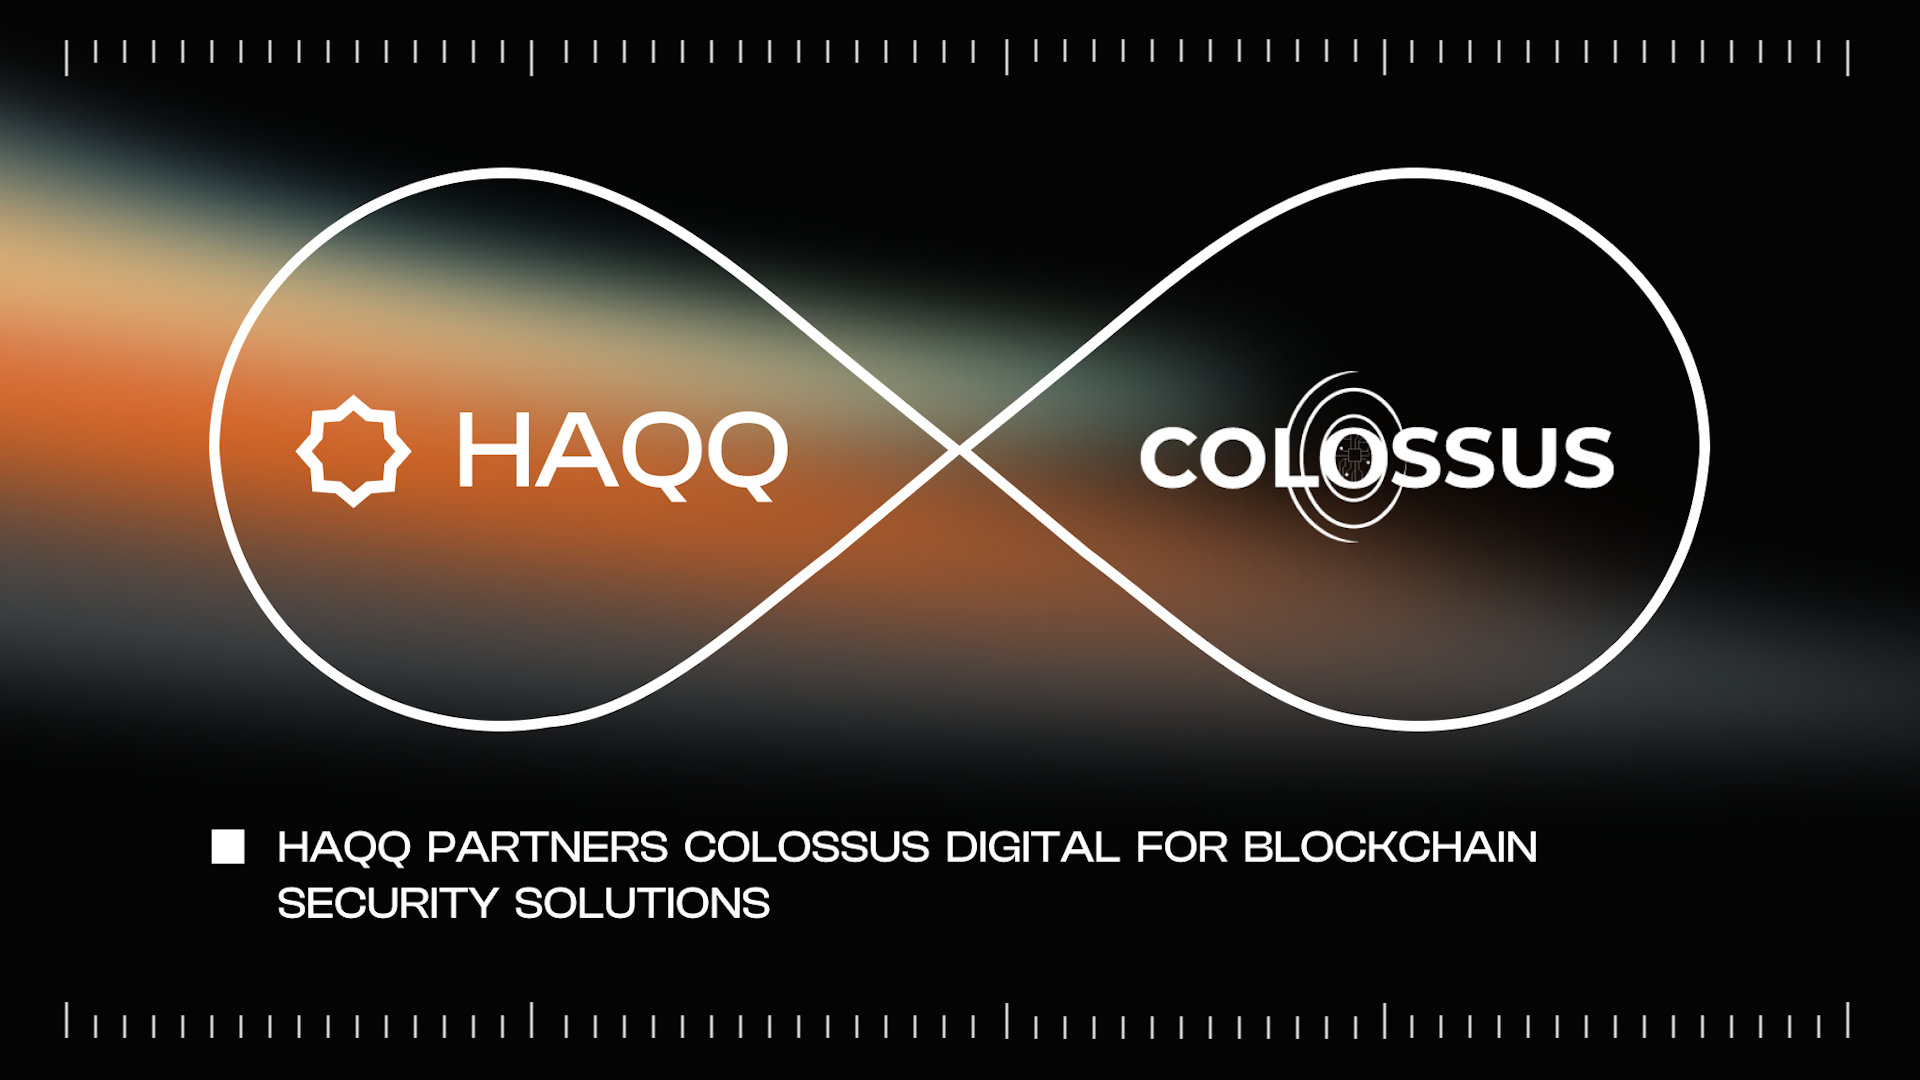 HAQQ Partners Colossus Digital for Improved Blockchain Security